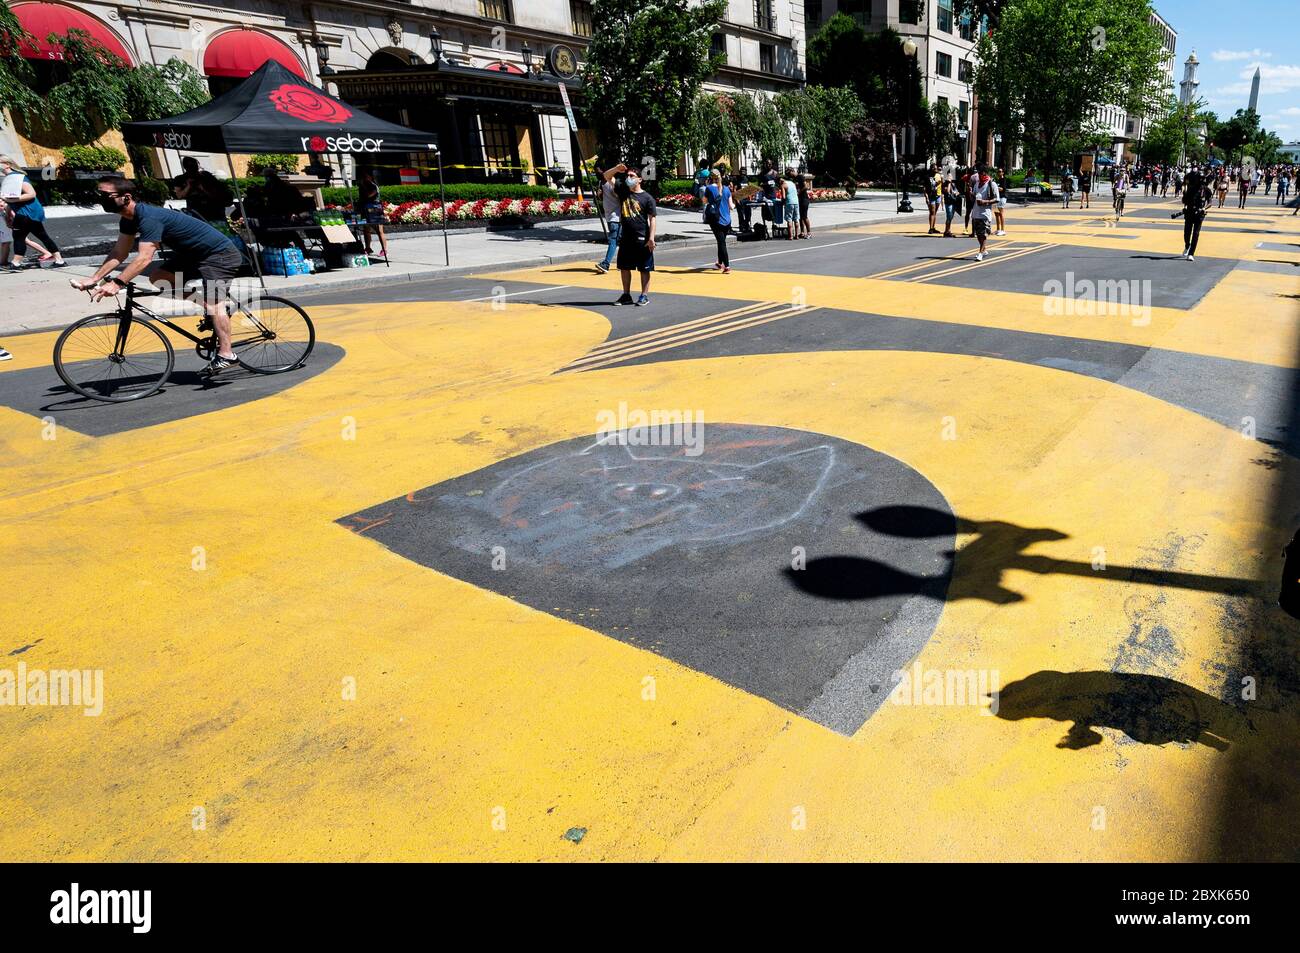 Washington, DC, USA. 7th June, 2020. June 7, 2020 - Washington, DC, United States: ''Black Lives Matter'' painted on 16th Street near I Street and a protest for the death of George Floyd and Black Live Matter. Credit: Michael Brochstein/ZUMA Wire/Alamy Live News Stock Photo